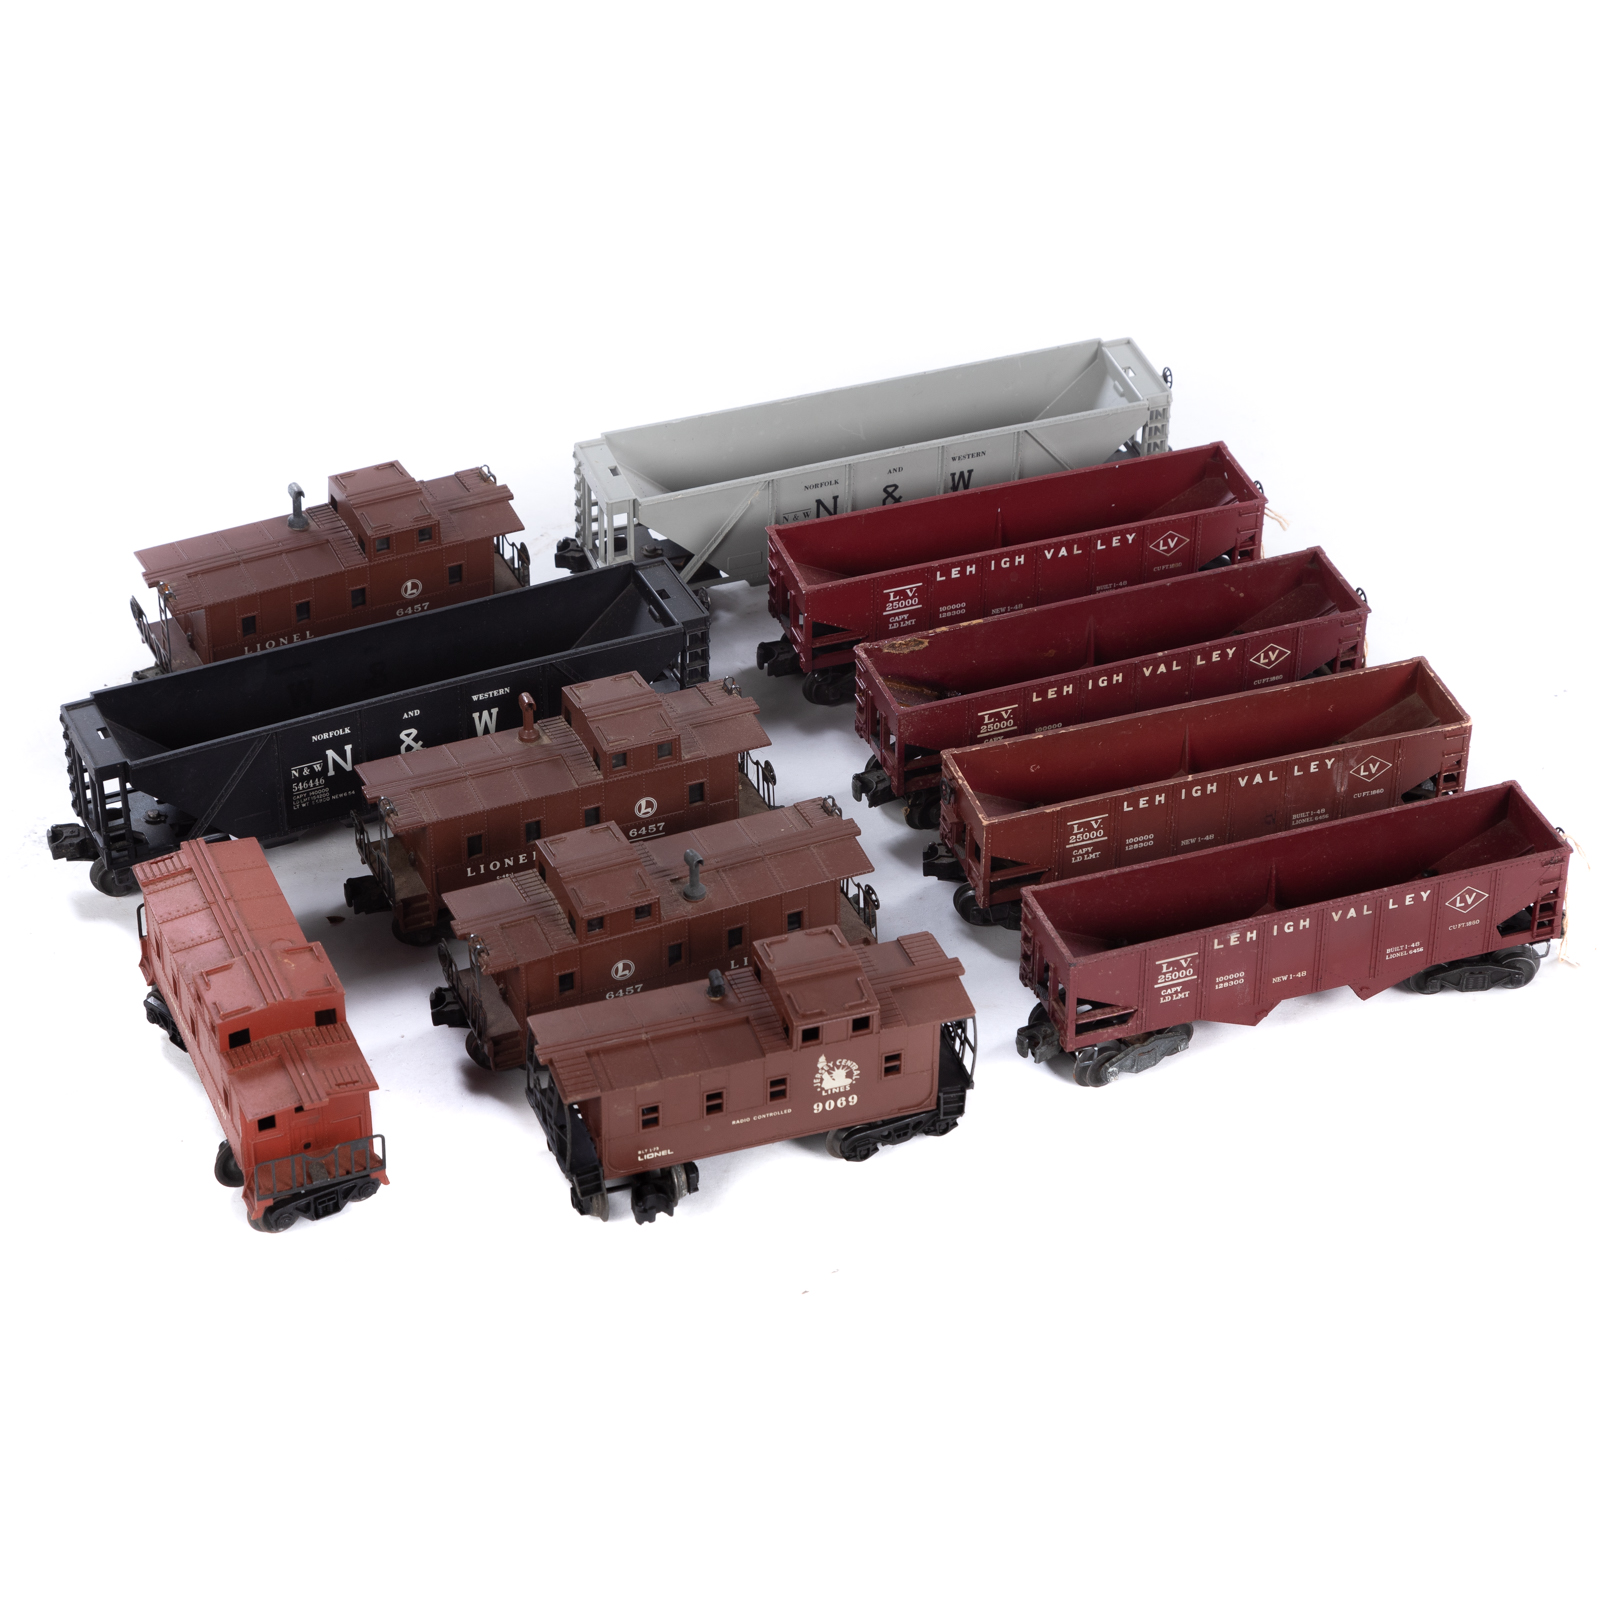 11 ASSORTED LIONEL FREIGHT CARS